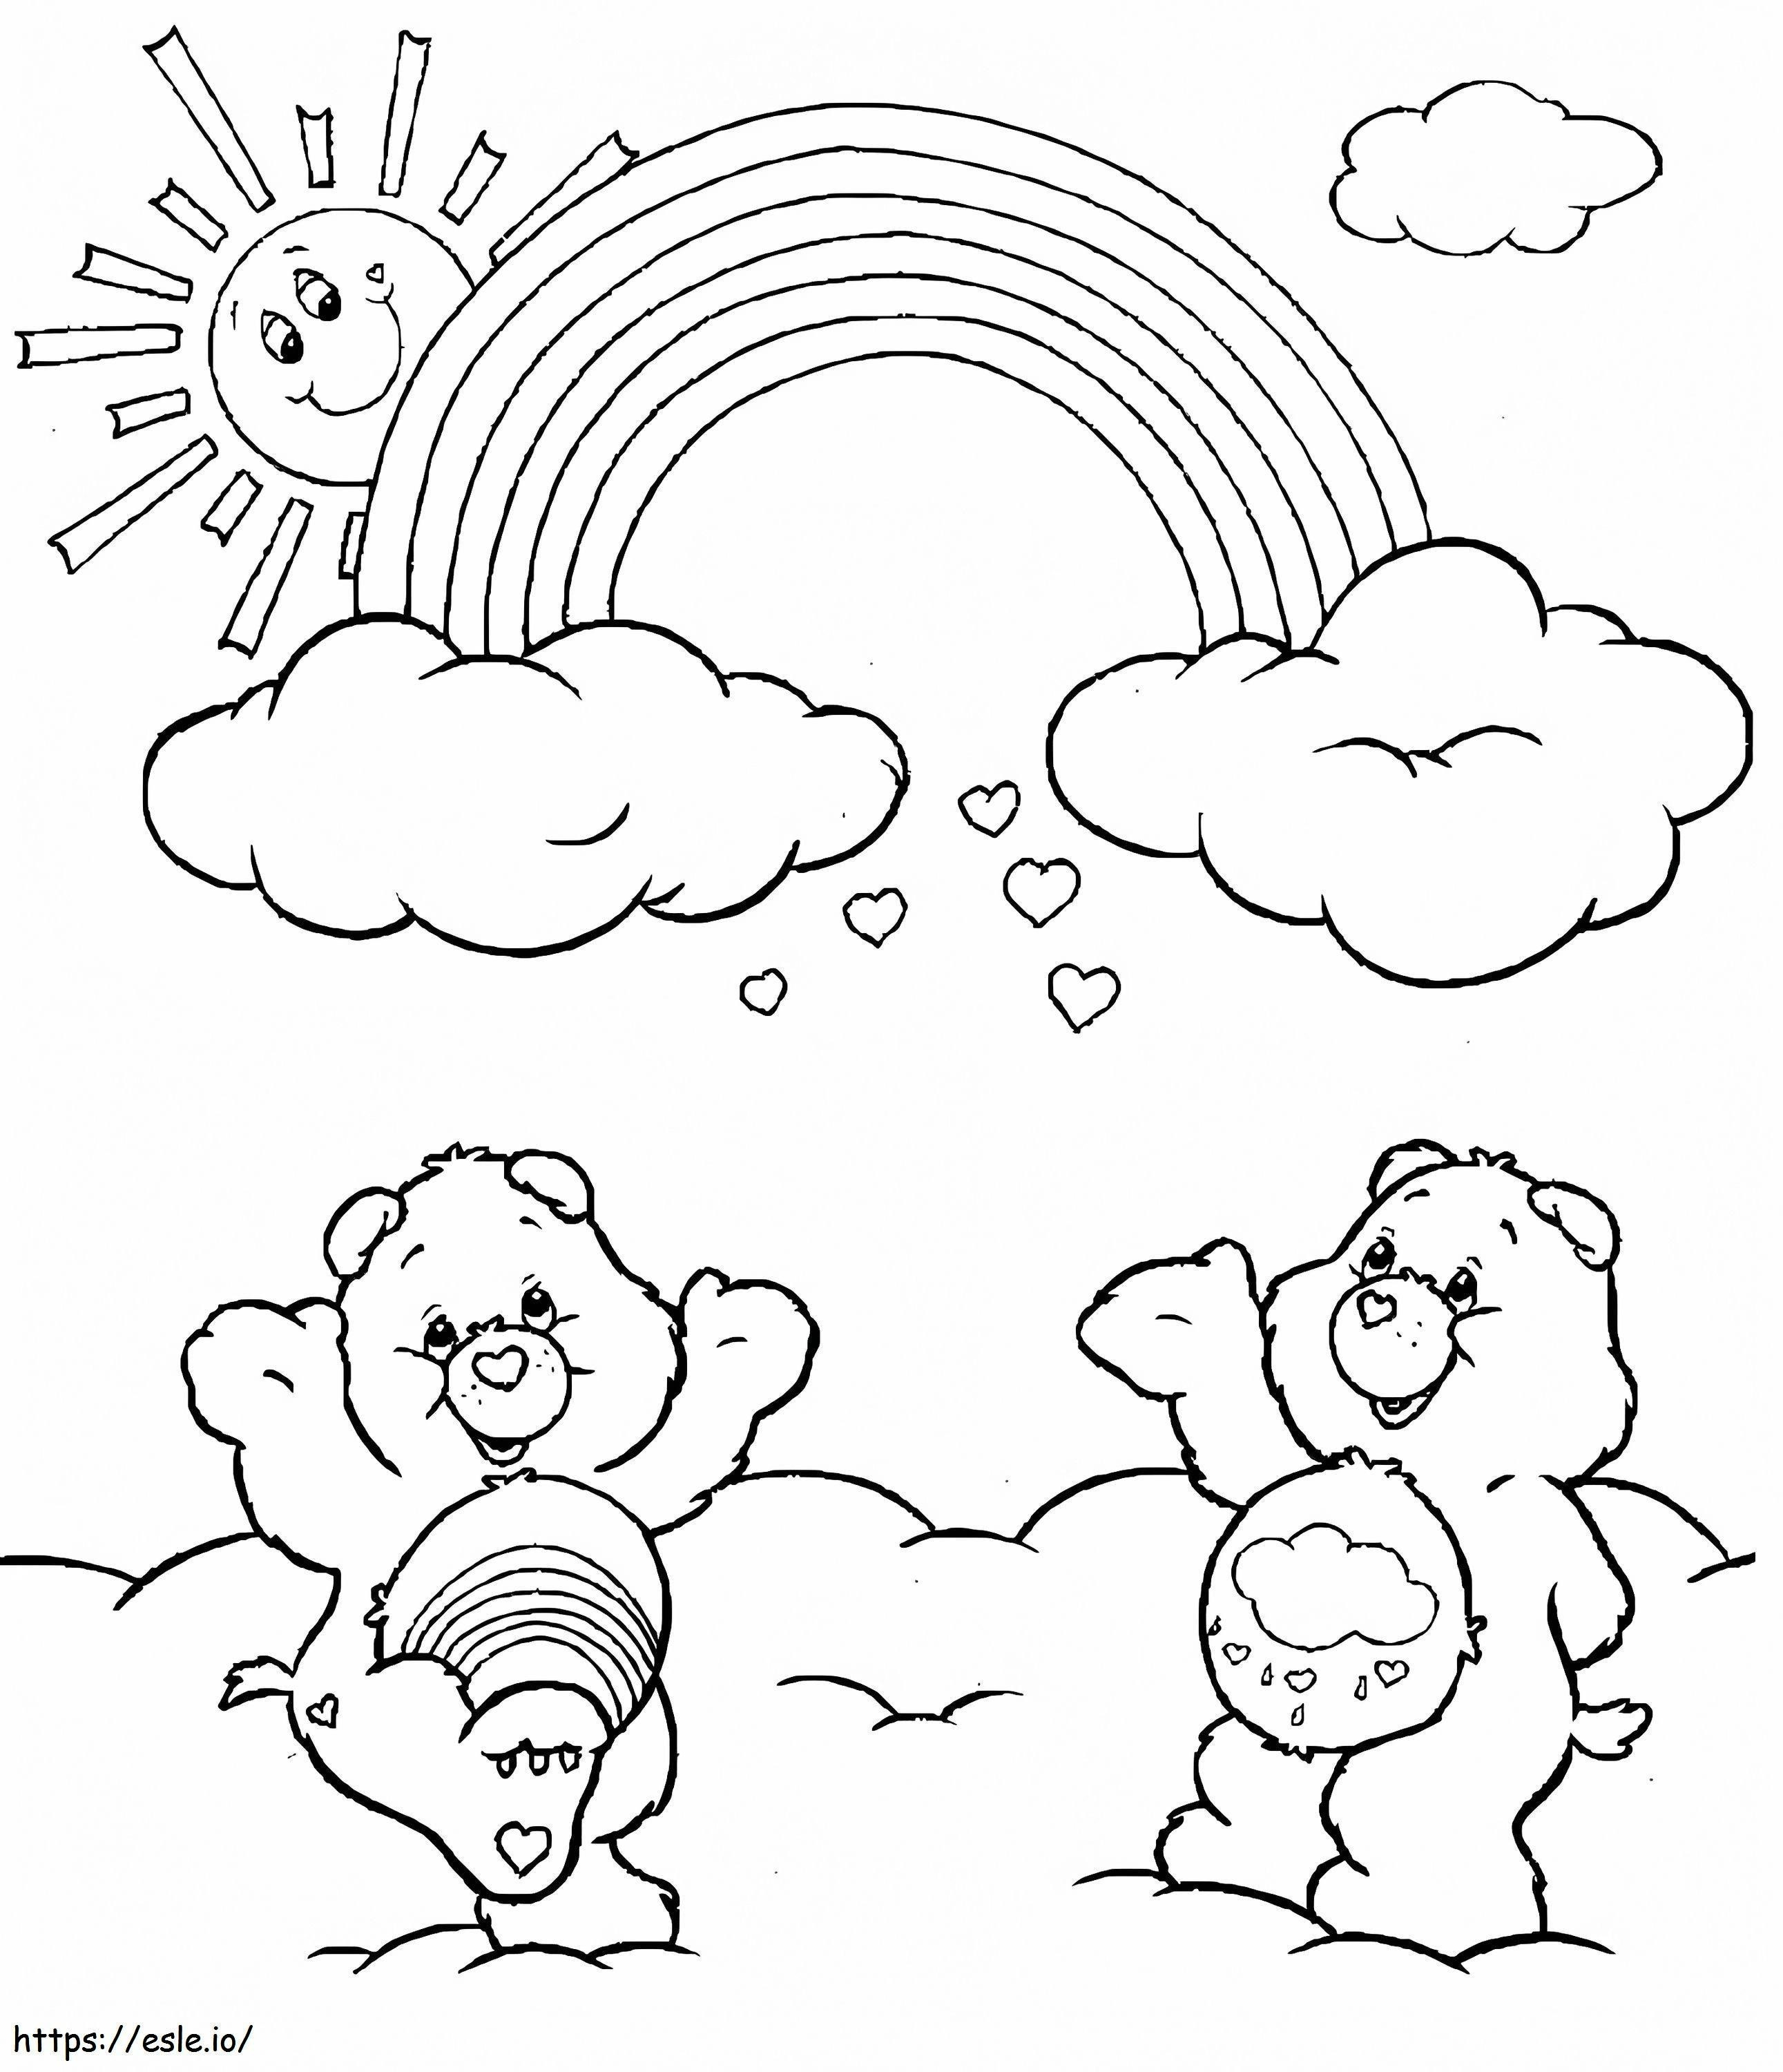 Two Bears And Rainbow coloring page